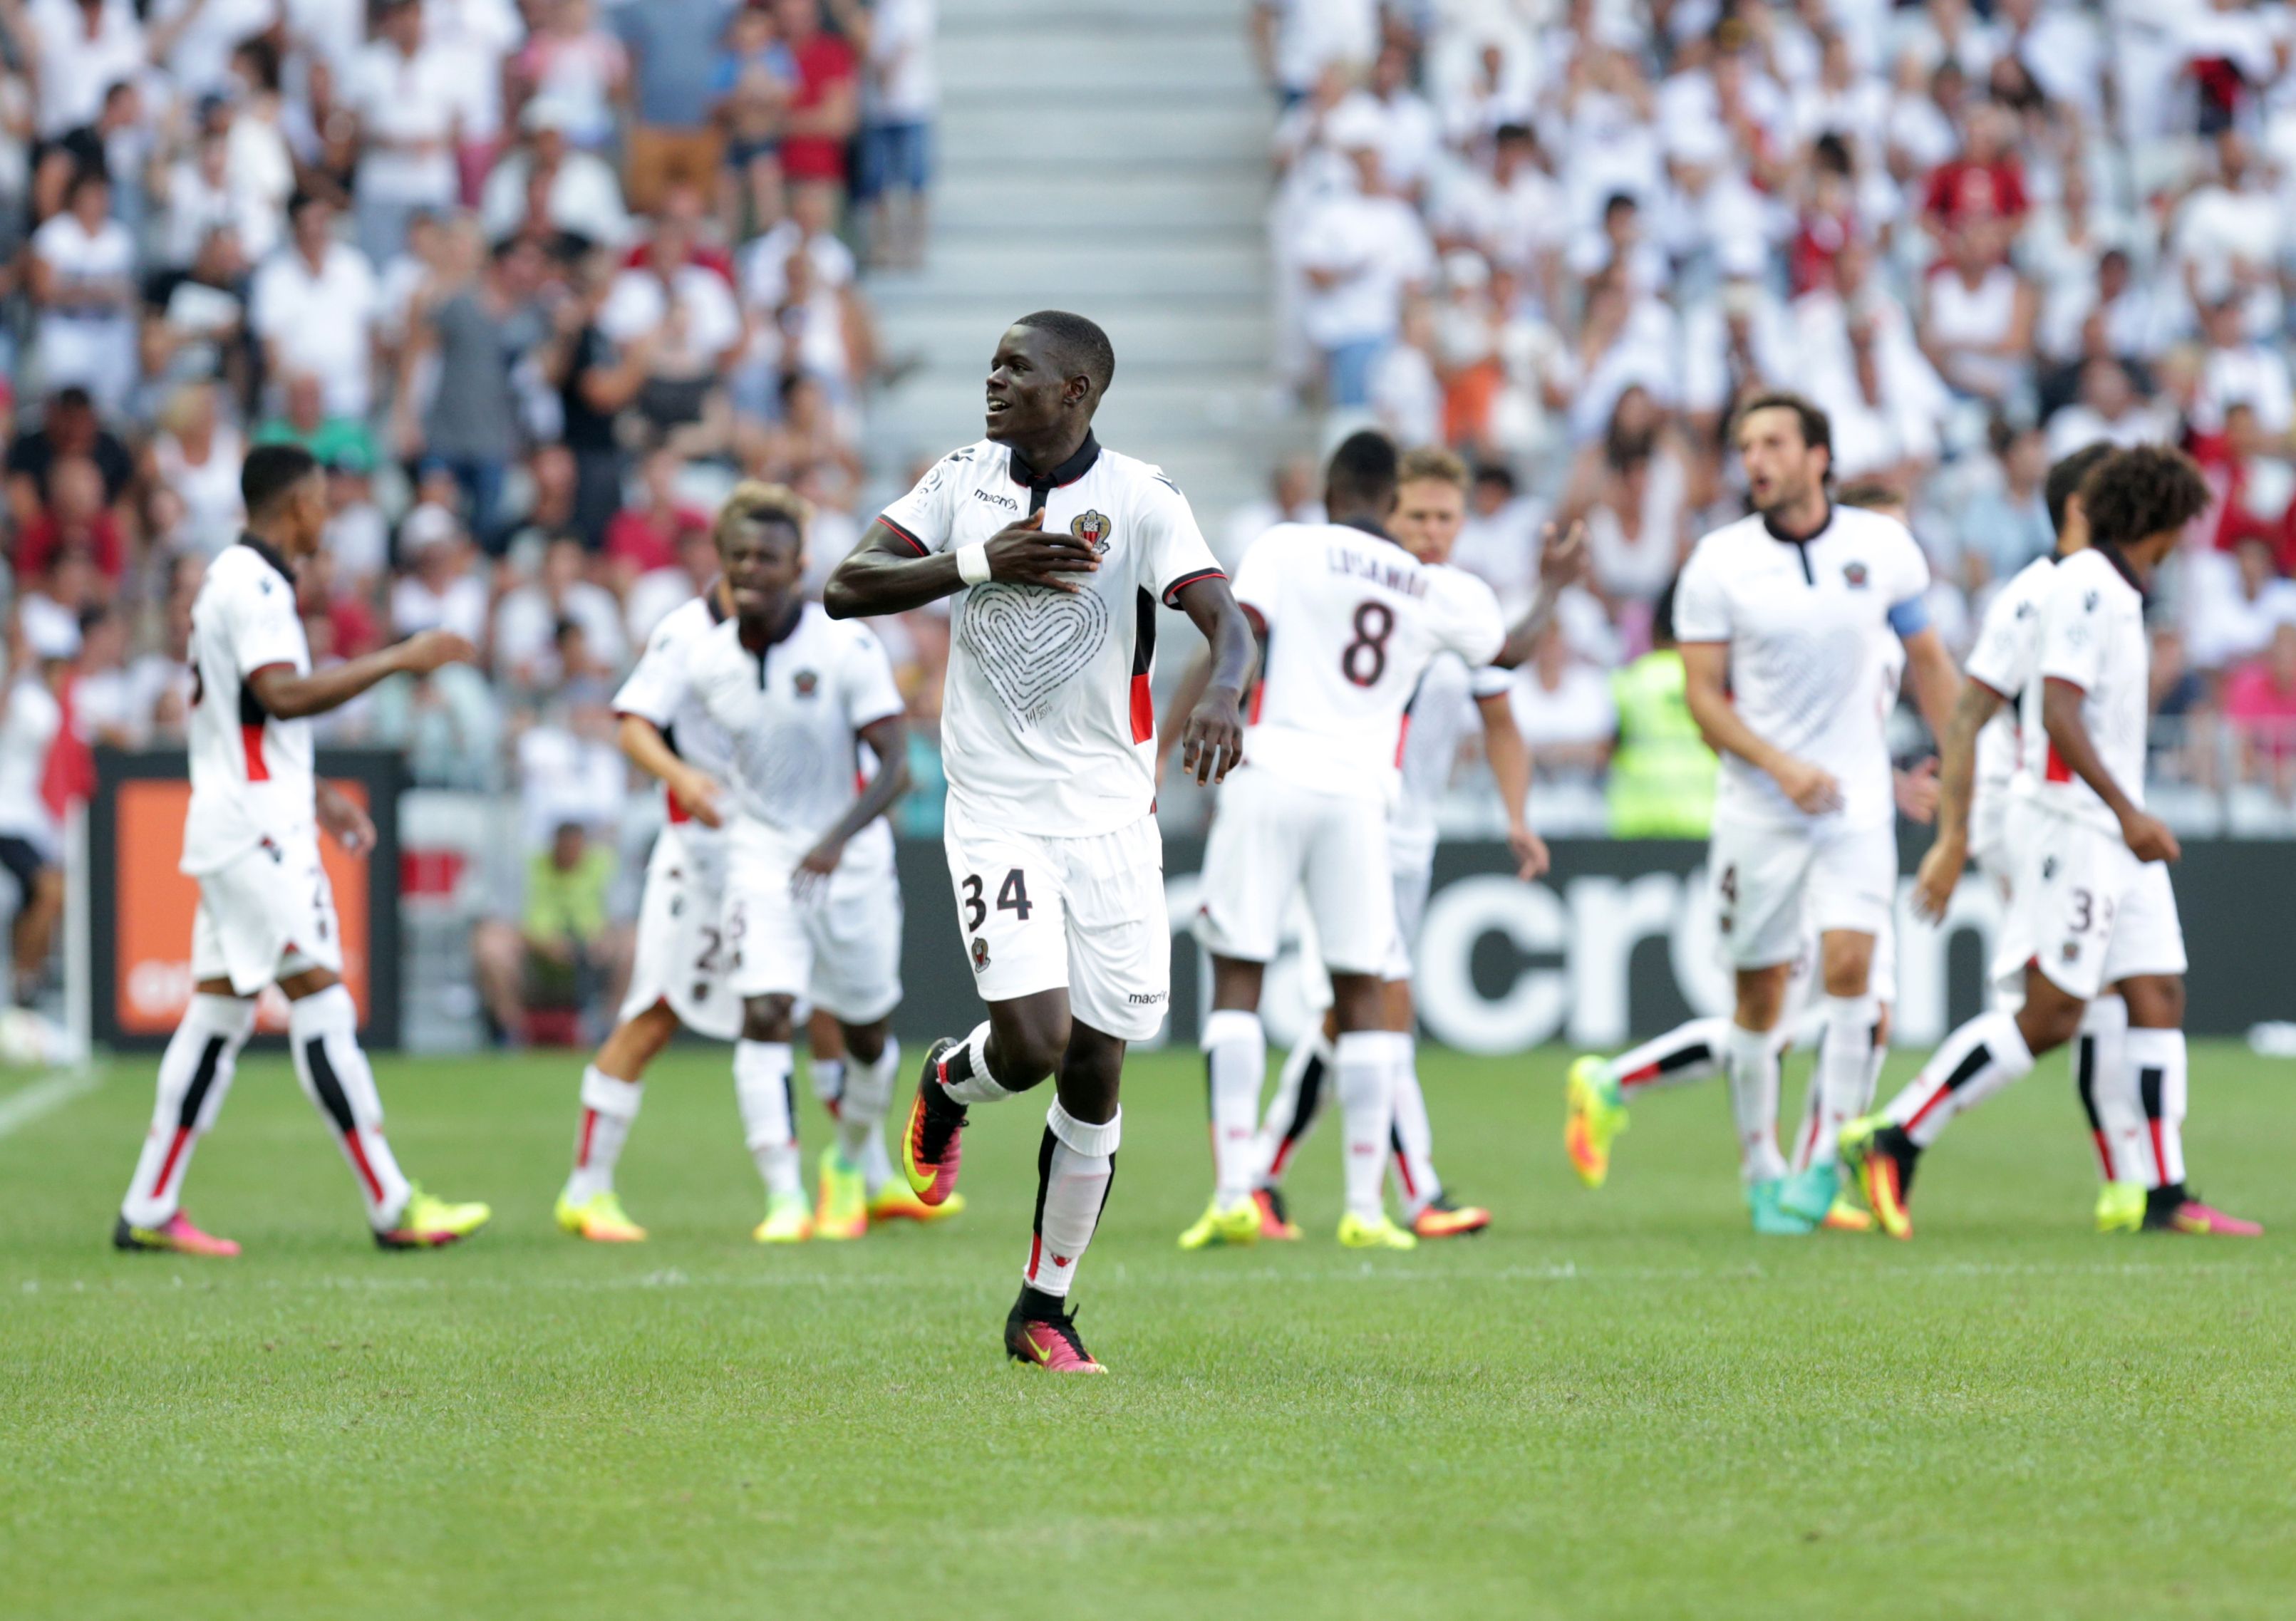 Nice's French defender Malang Sarr (C) celebrates after scoring a goal during the French L1 football match Nice versus Rennes on August 14, 2016, at the Allianz Riviera stadium in Nice, southeastern France.  / AFP / JEAN CHRISTOPHE MAGNENET        (Photo credit should read JEAN CHRISTOPHE MAGNENET/AFP/Getty Images)